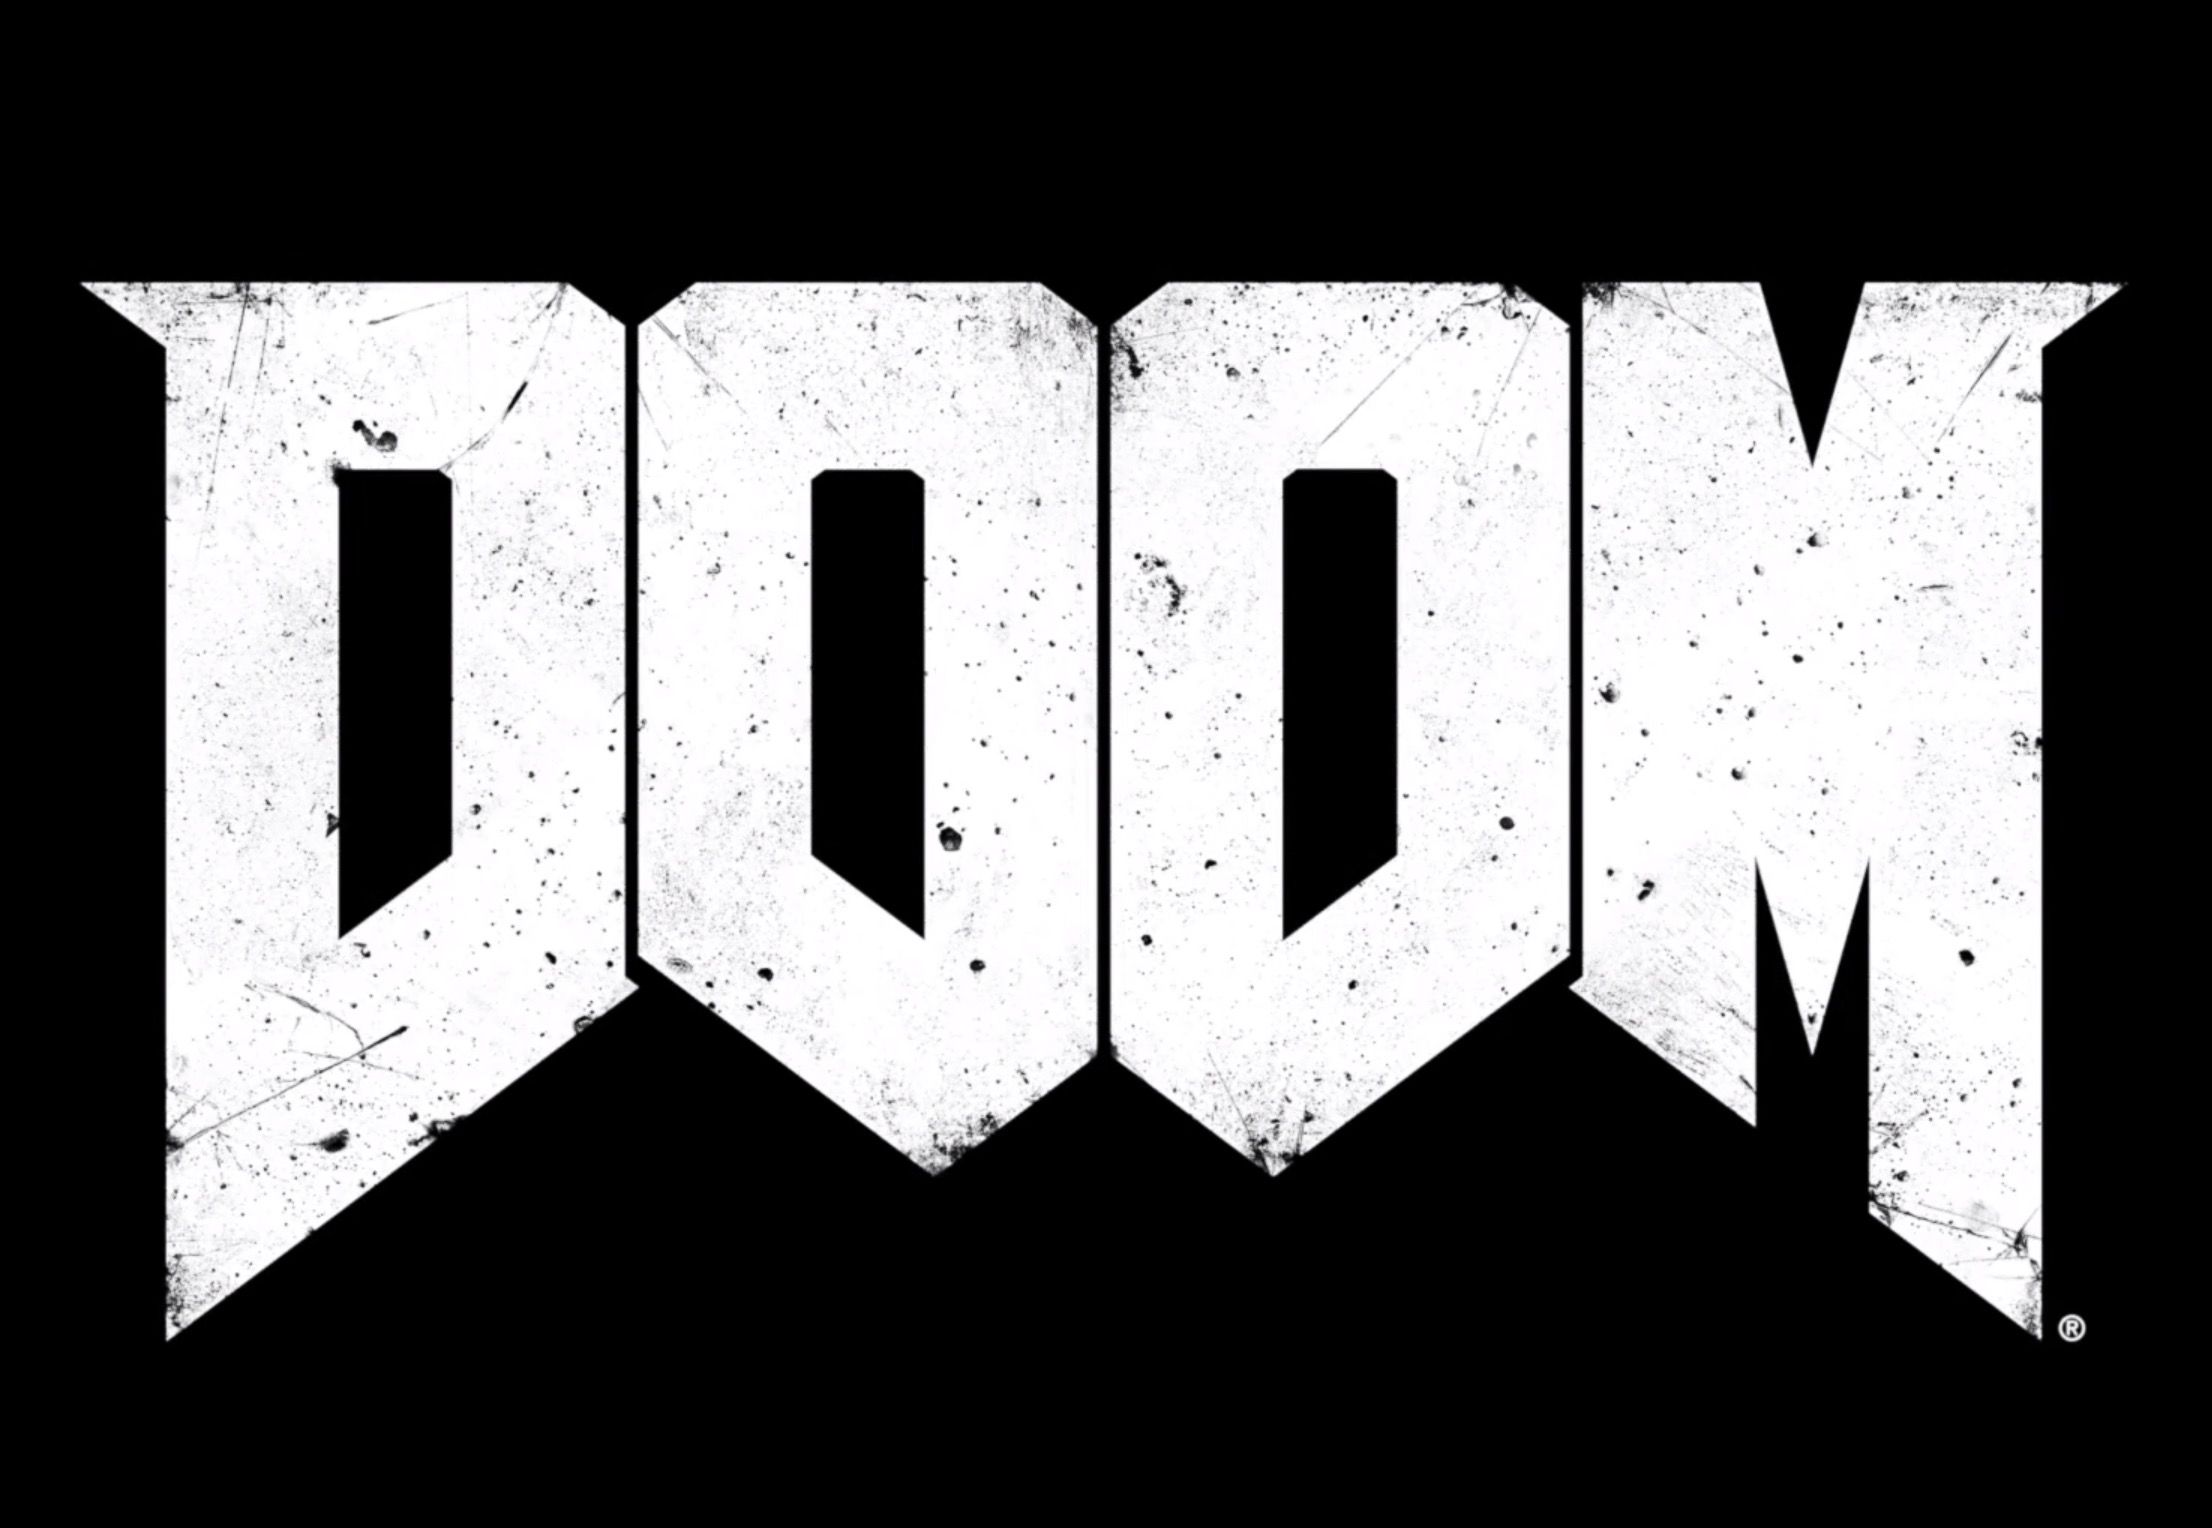 play doom s open beta how to get it now on ps4 xbox one and steam image 1